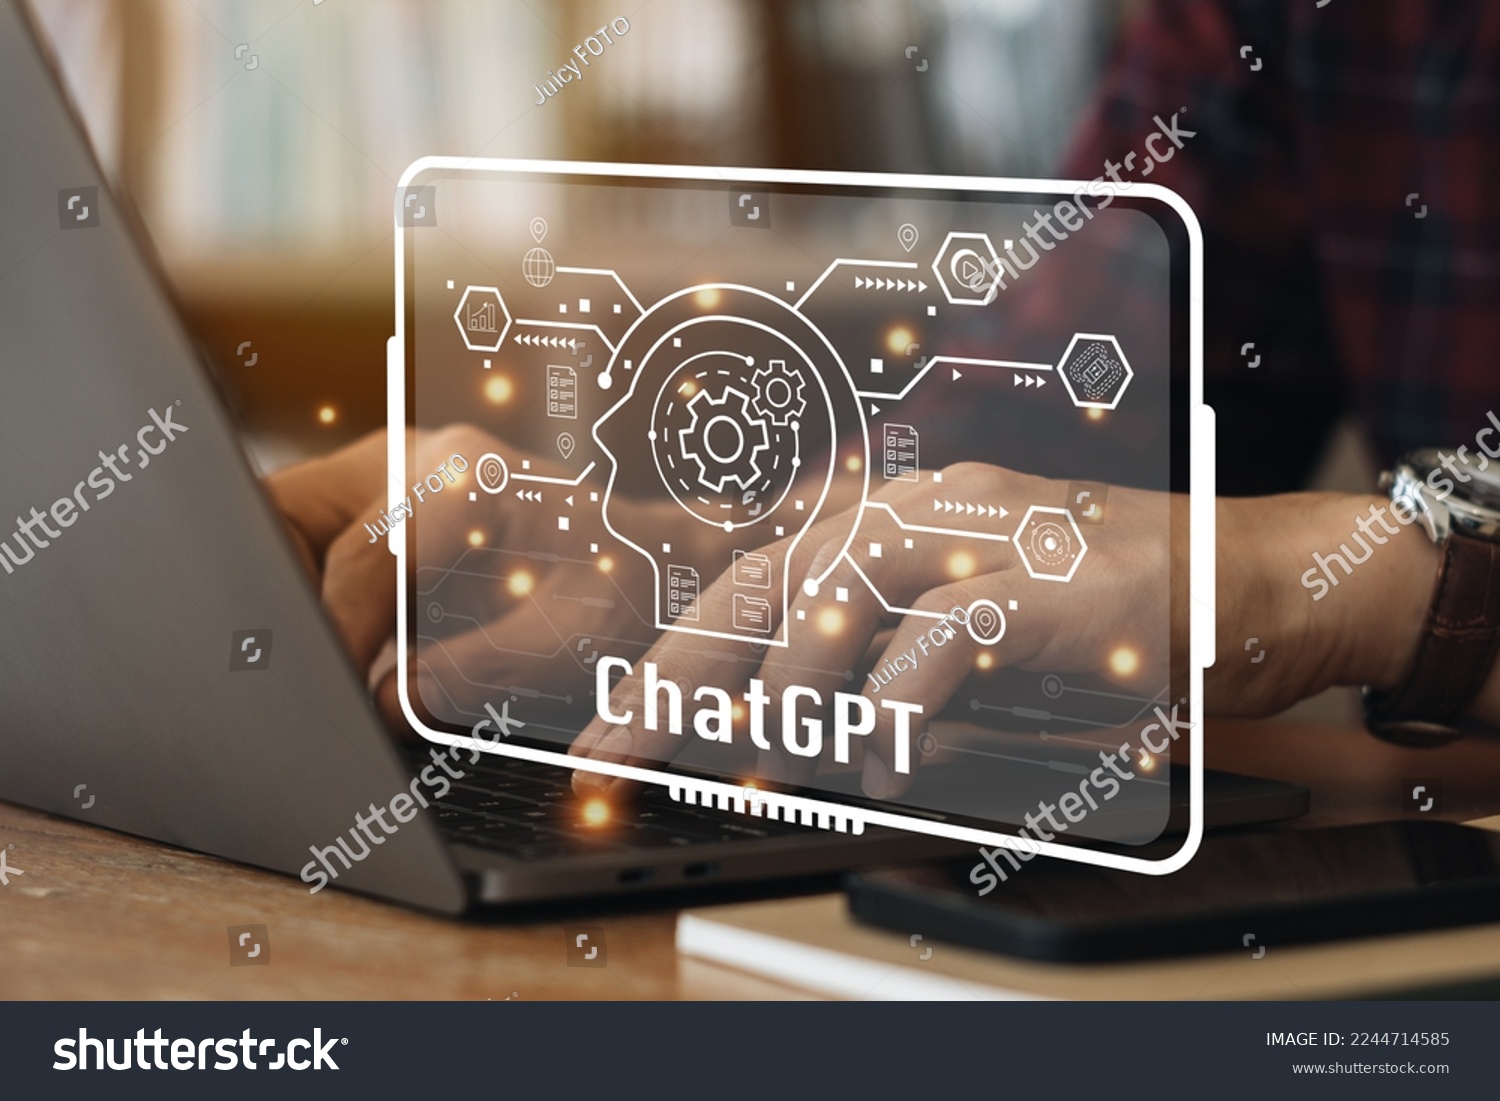 ChatGPT Chat with AI or Artificial Intelligence. Young businessman chatting with a smart AI or artificial intelligence using an artificial intelligence chatbot developed by OpenAI. #2244714585